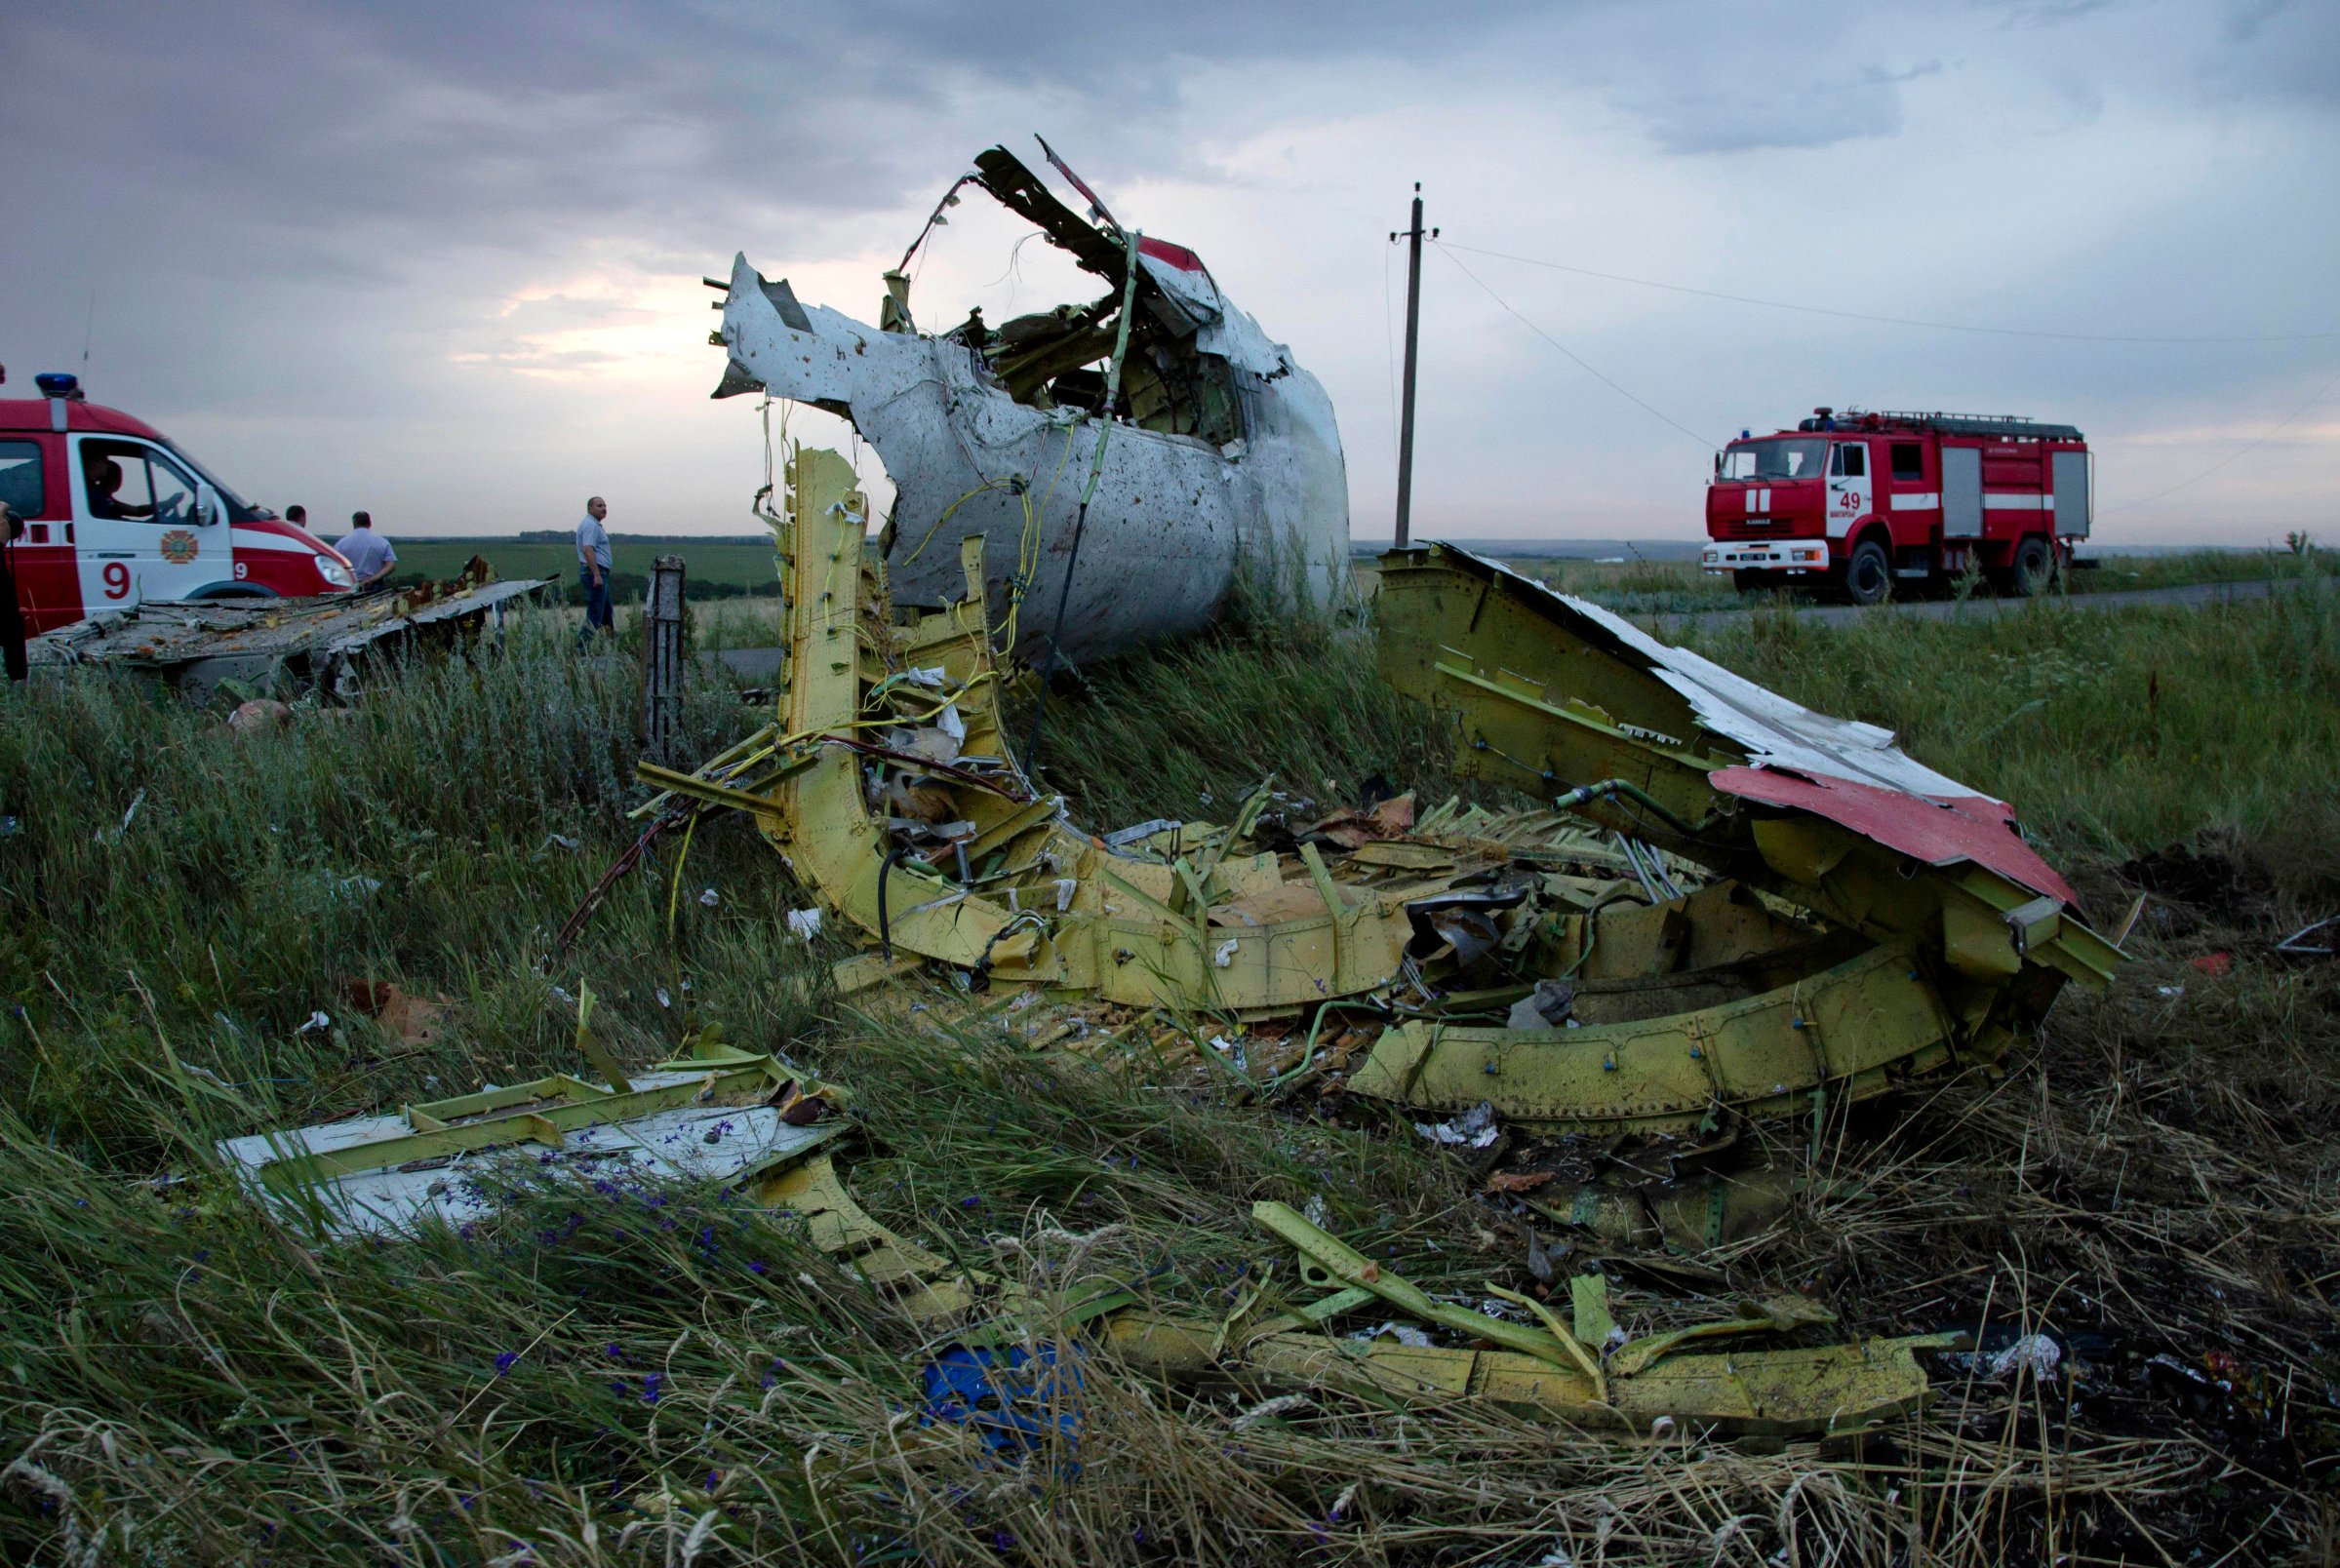 Firefighters arrive at the crash site of Malaysia Airlines Flight 17 near the village of Hrabove, Ukraine, on July 17, 2014.